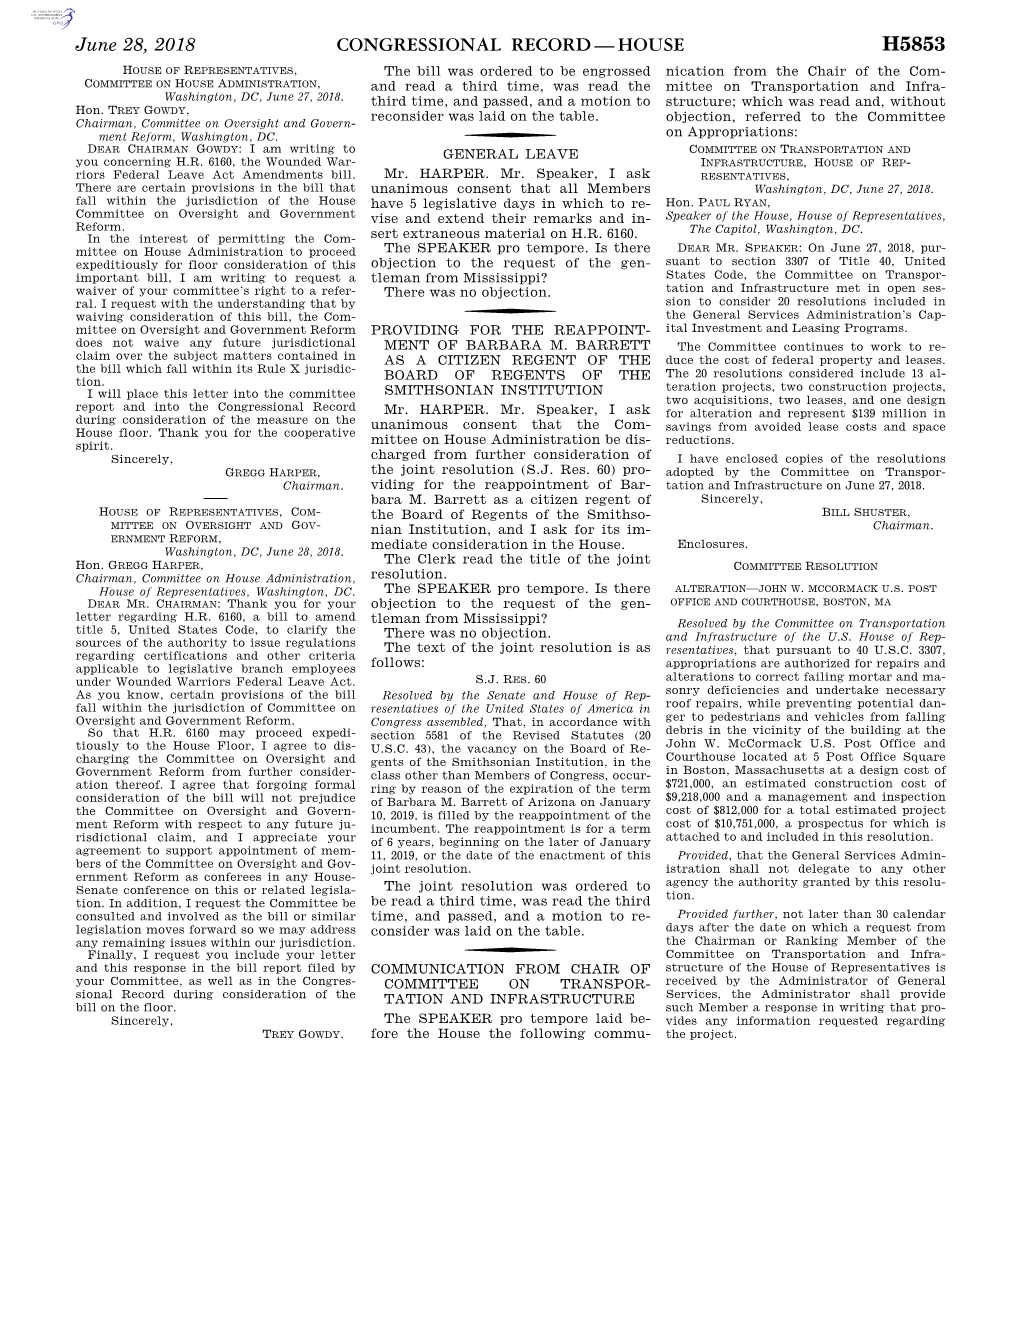 Congressional Record—House H5853